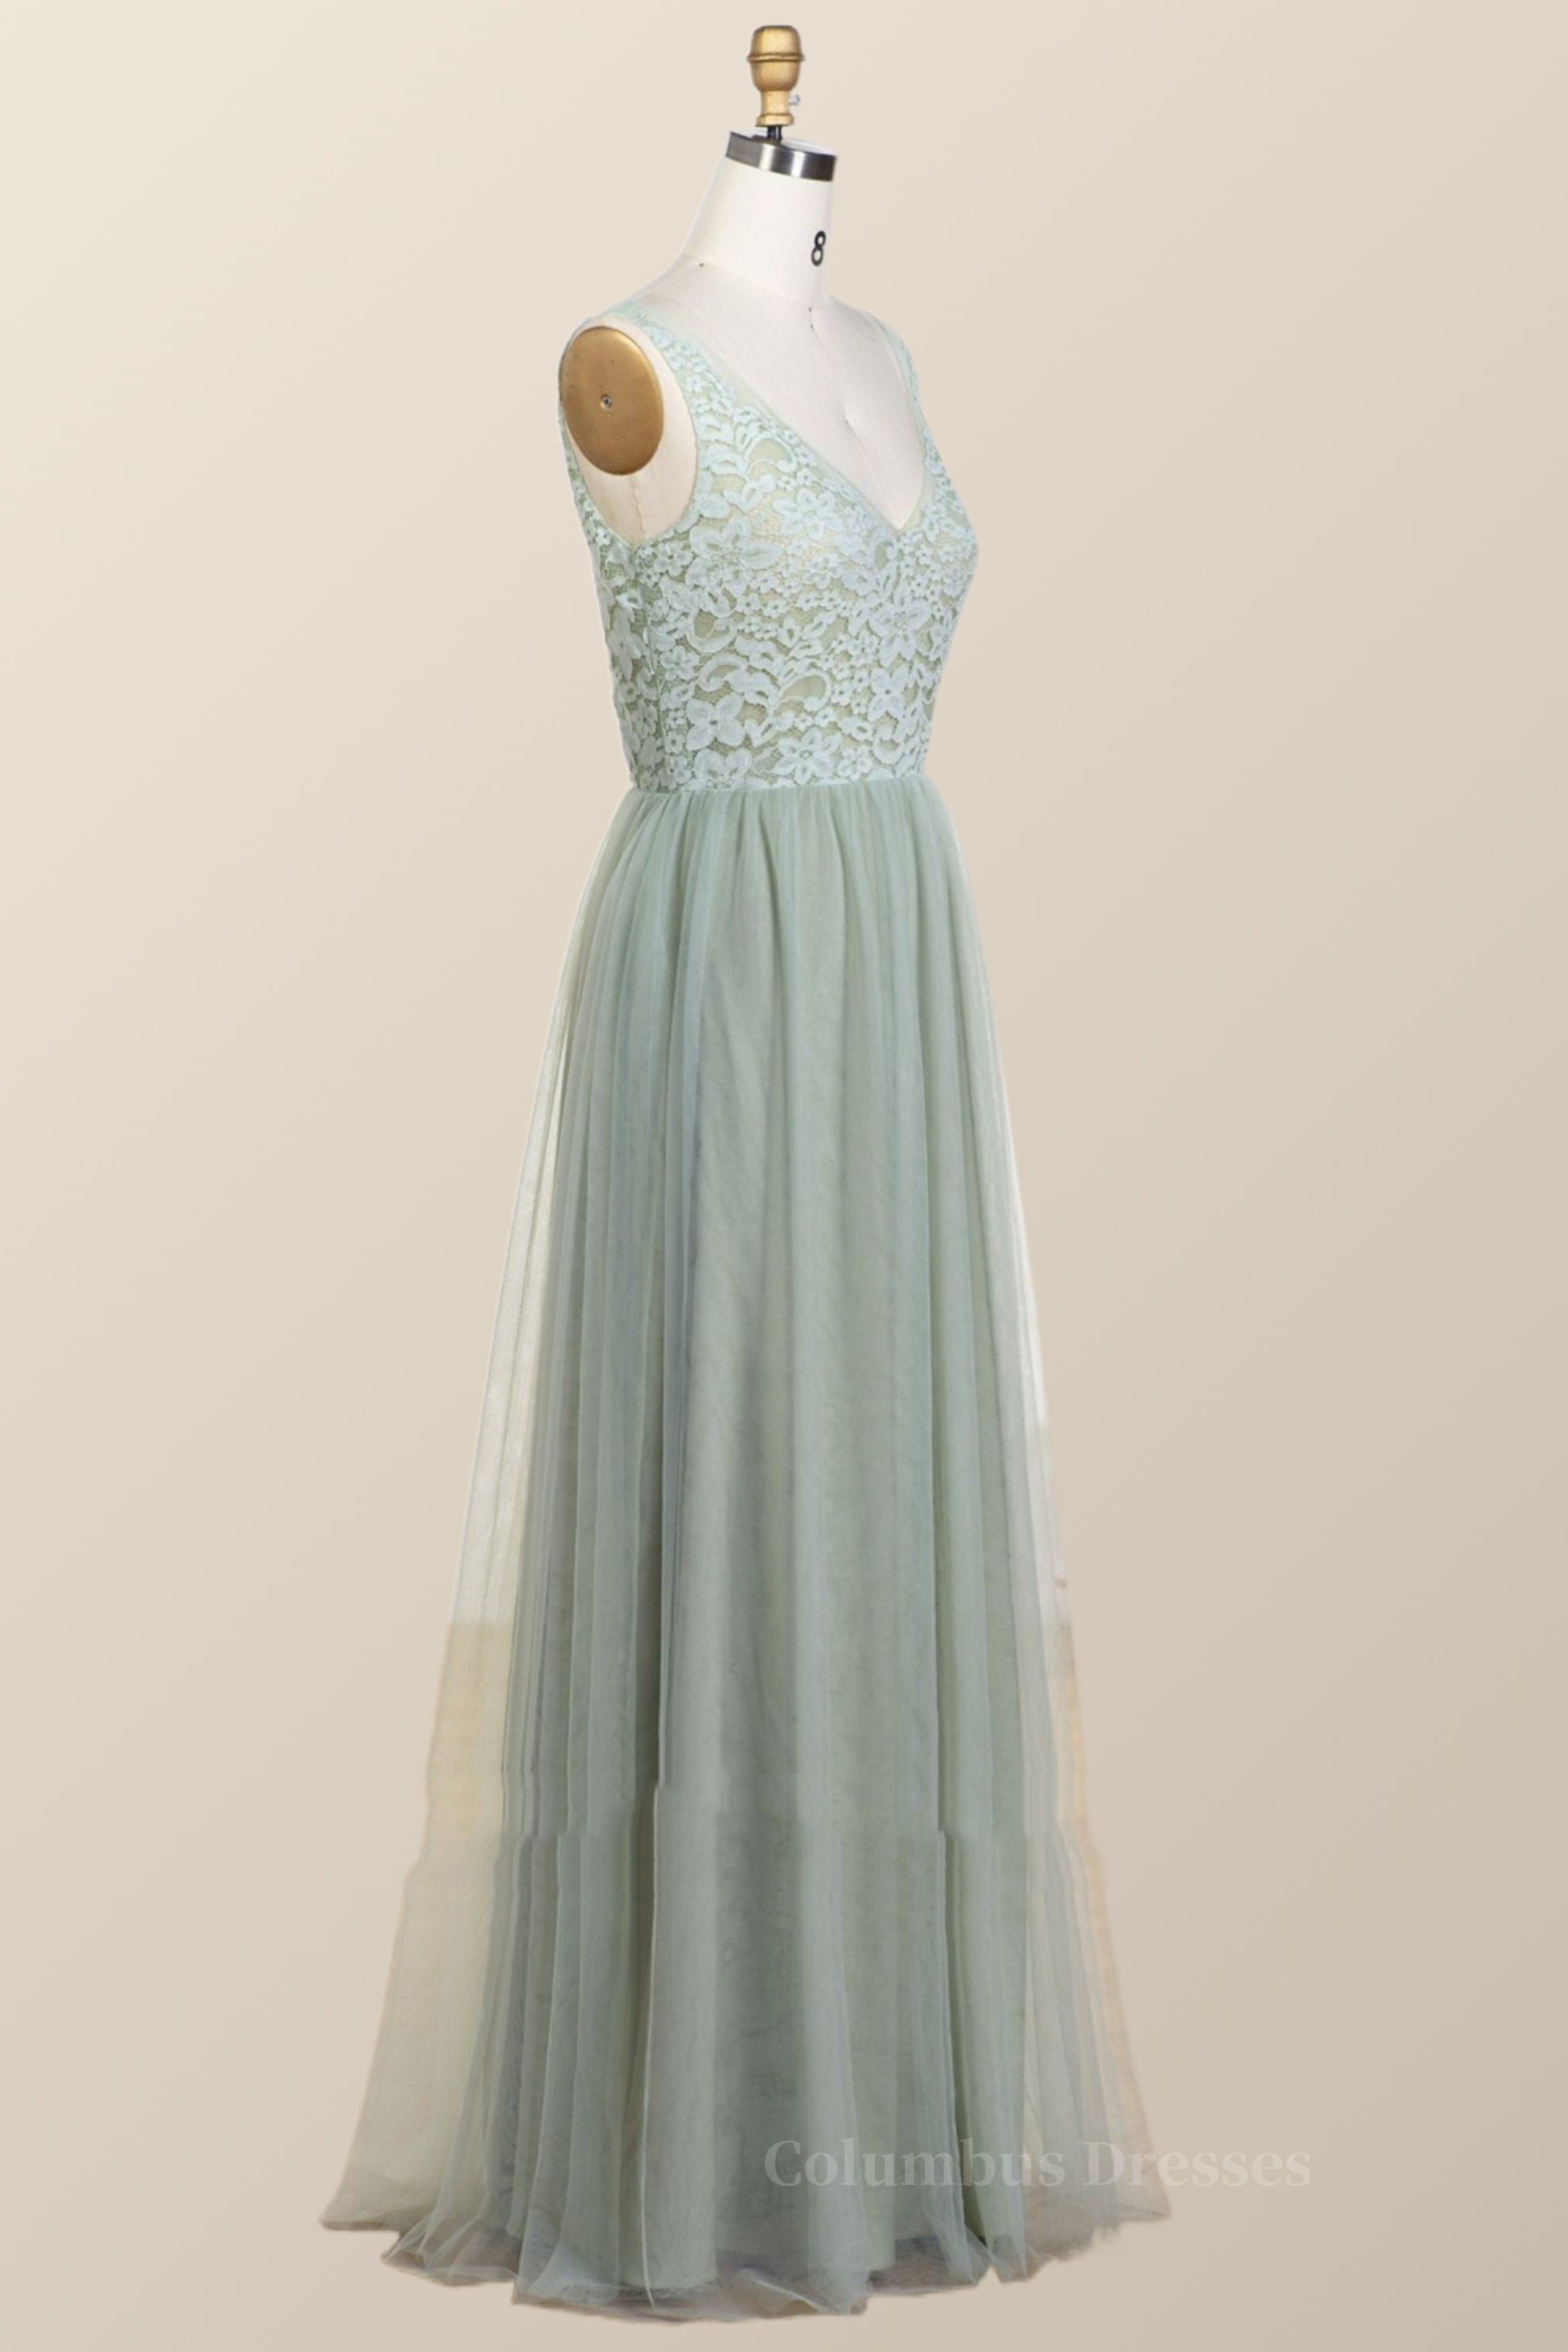 Homecoming Dresses Modest, Sage Green Lace and Tulle Long Bridesmaid Dress